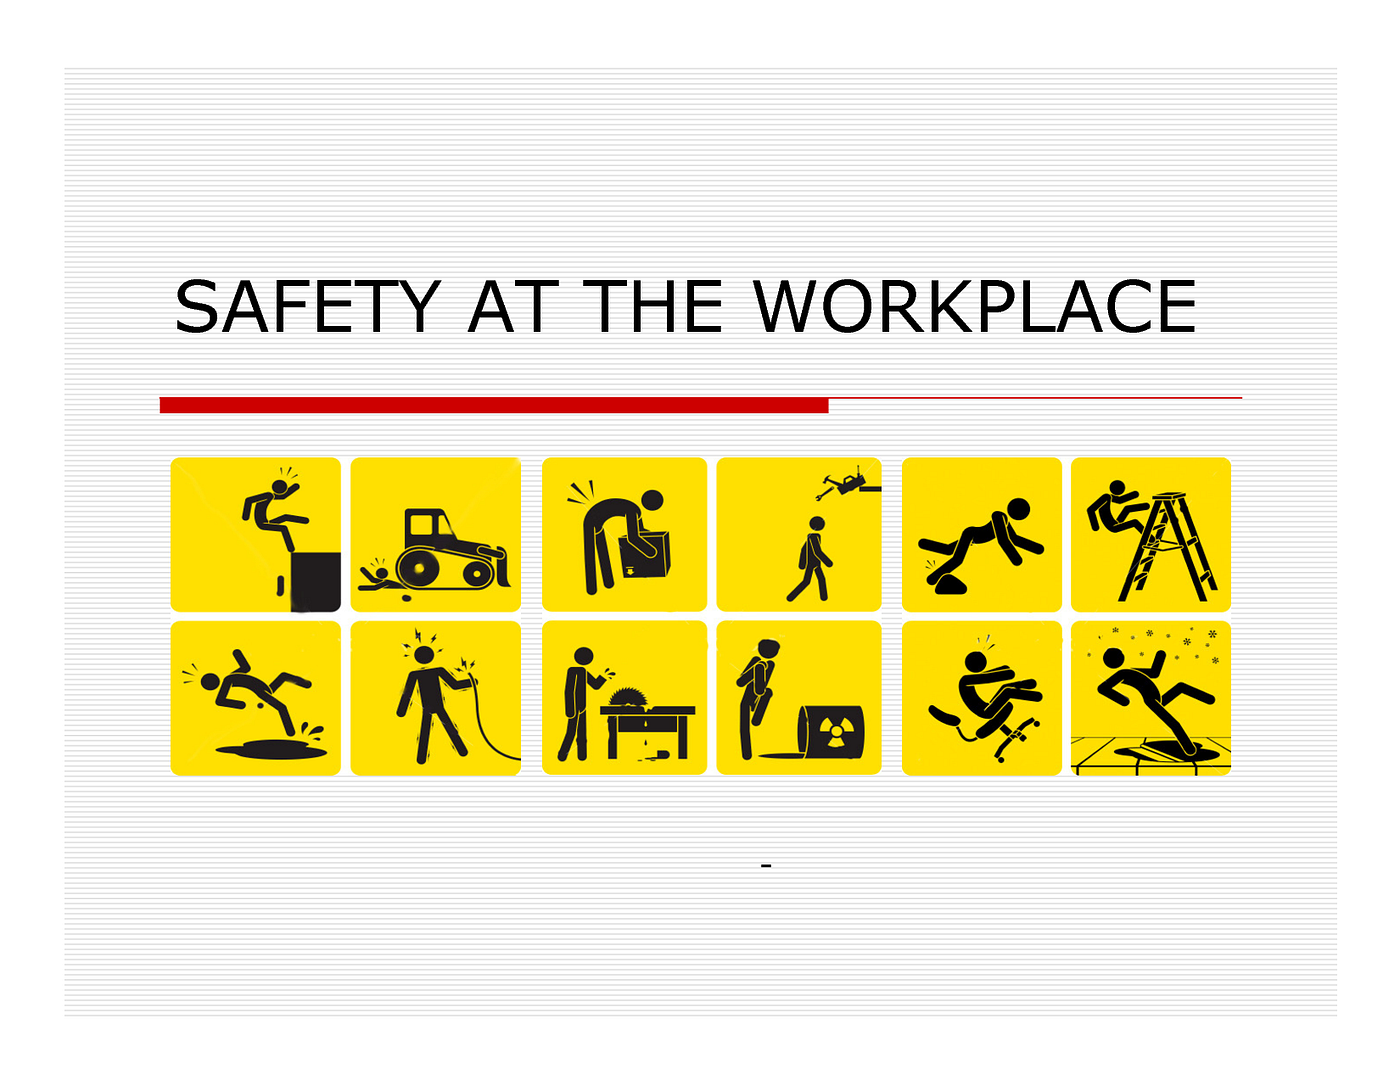 Safety Doesn't Just Apply at Work, Off-the-job Safety is Just as Important  - HSI